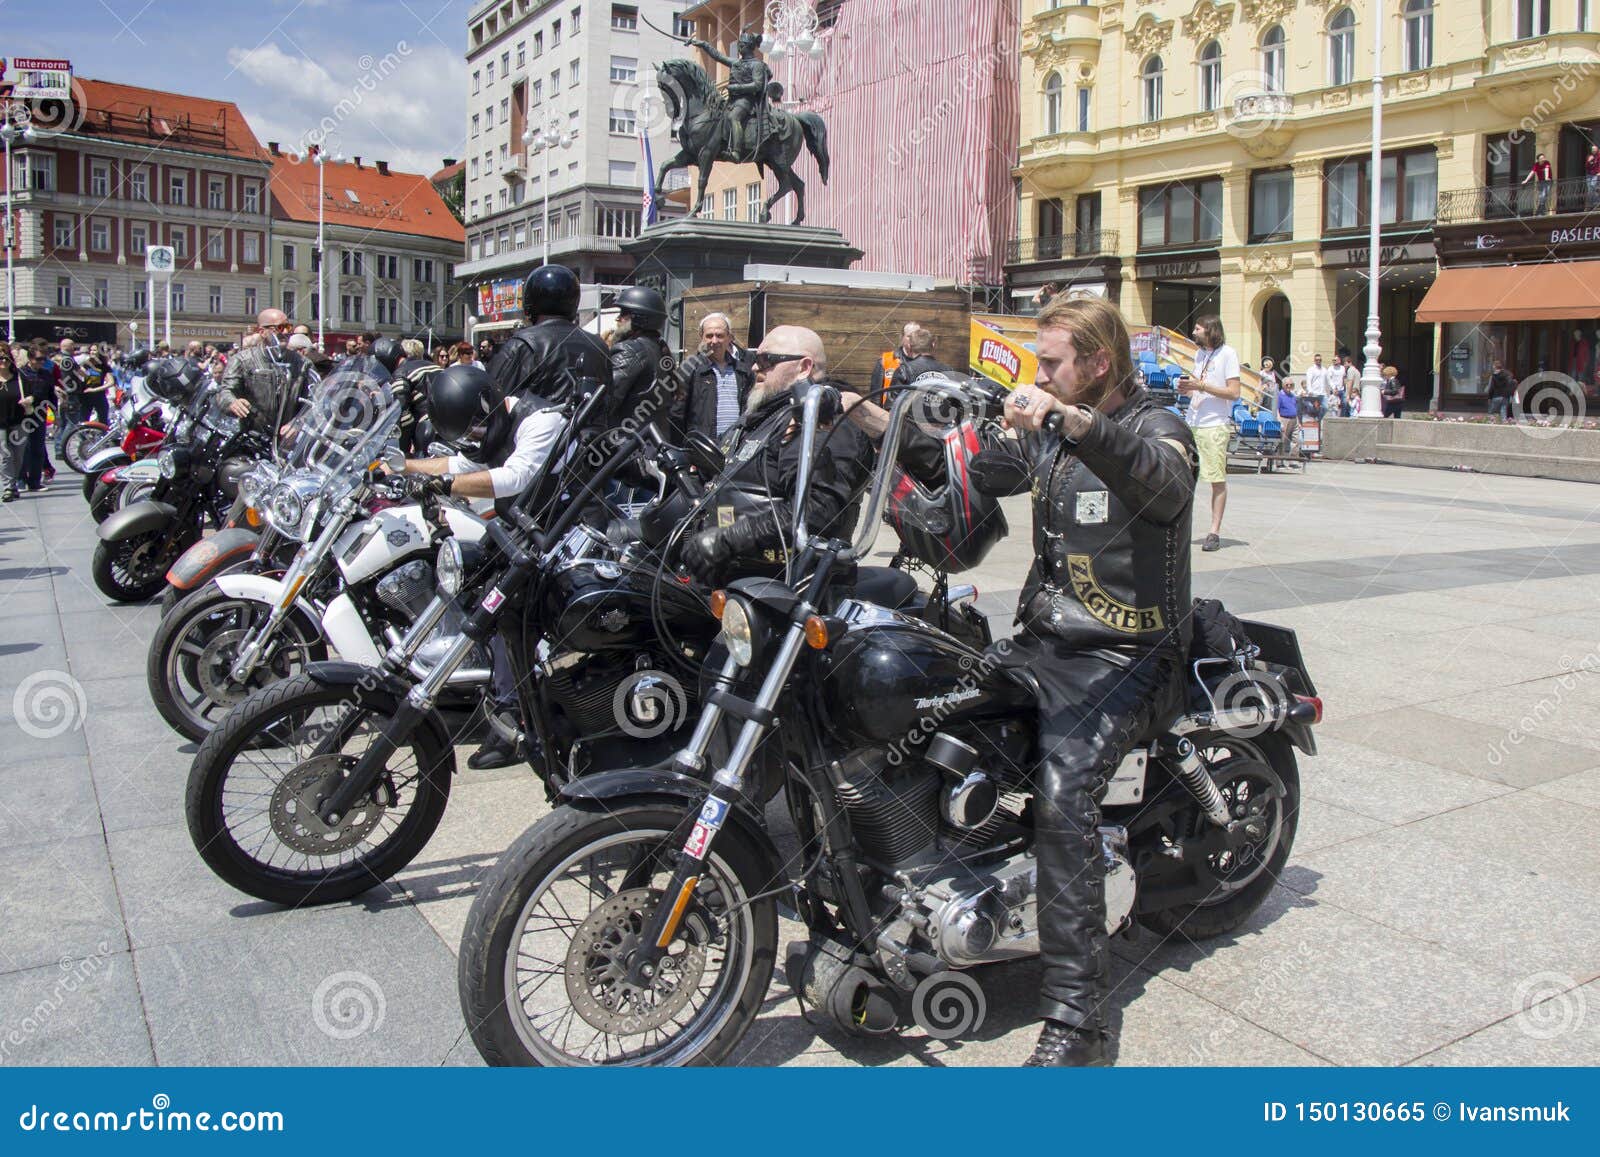 Group Of Motorcycle Harley Davidson Fans In Zagreb Editorial Image Image Of Editorial Engine 150130665